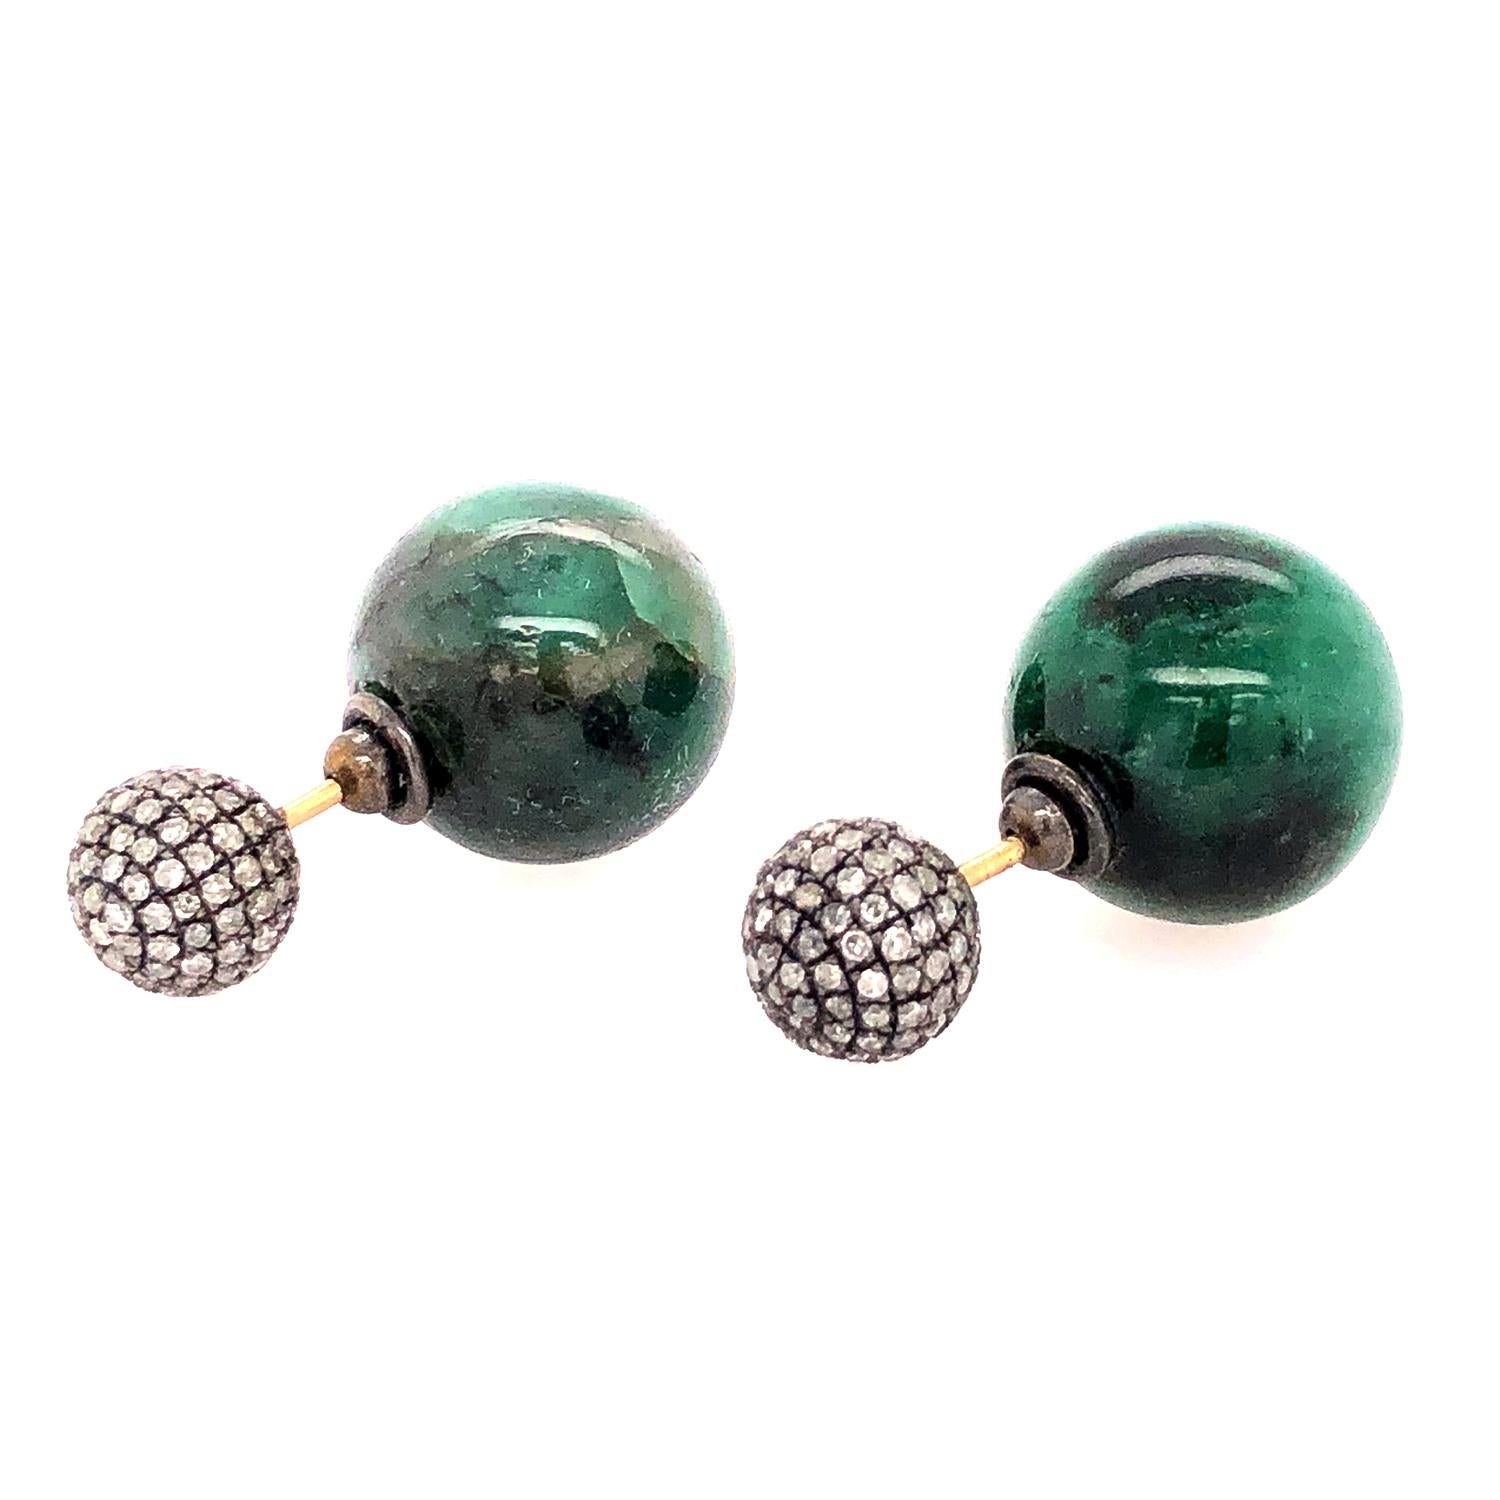 Emerald & Pave Diamond Ball Earrings Made In 14k Gold In New Condition For Sale In New York, NY